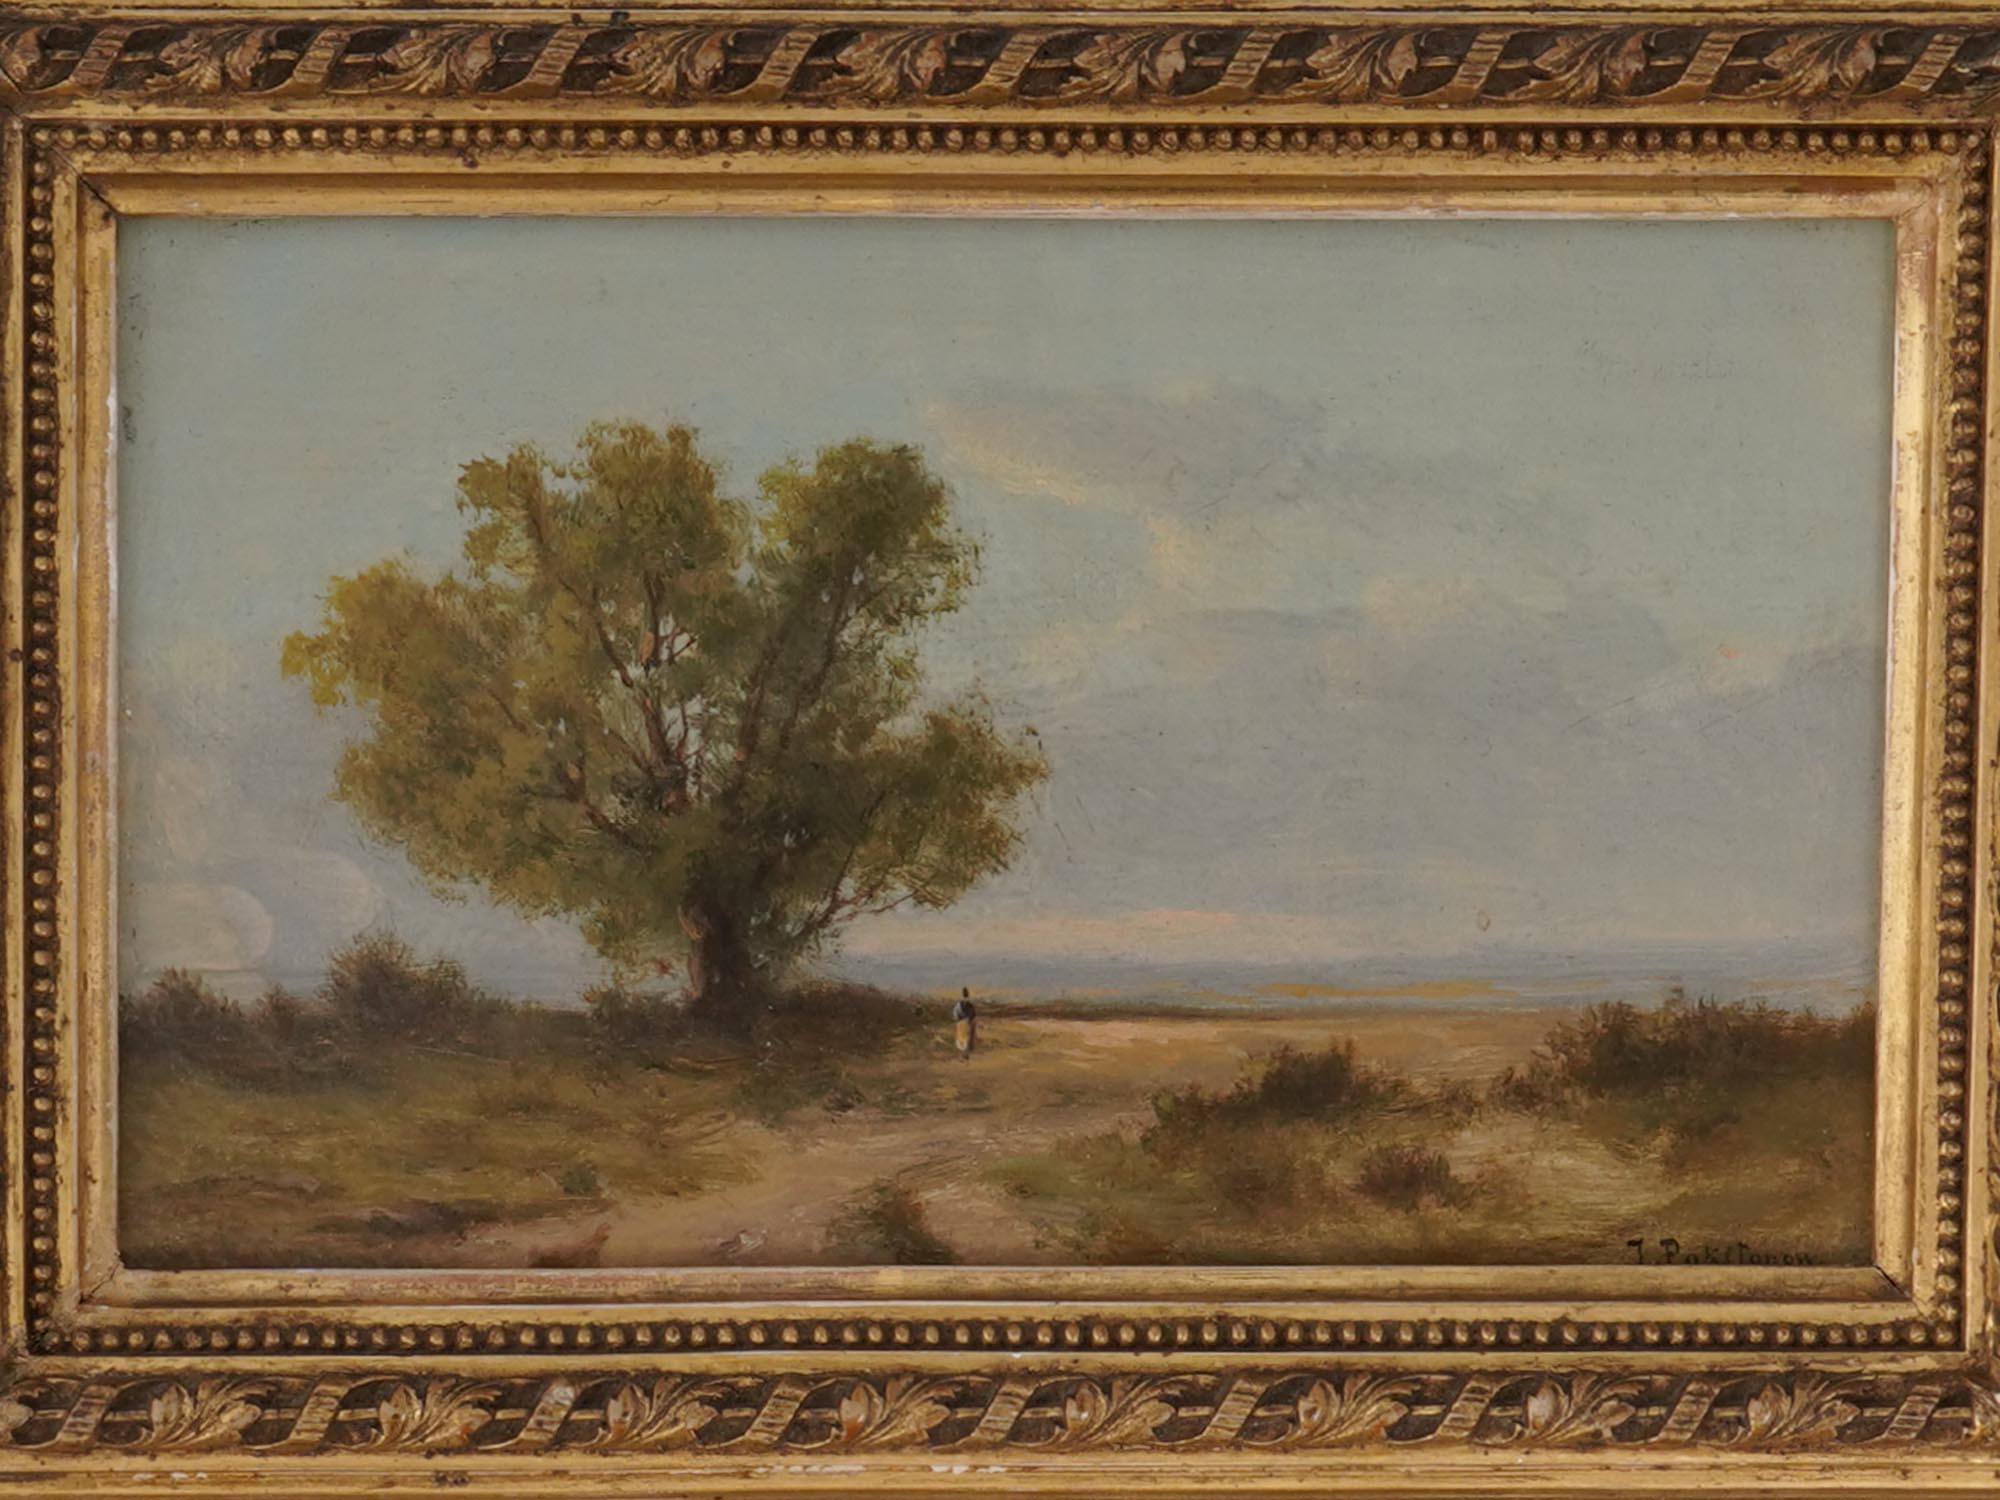 RUSSIAN OIL LANDSCAPE PAINTING BY IVAN POKHITONOV PIC-1